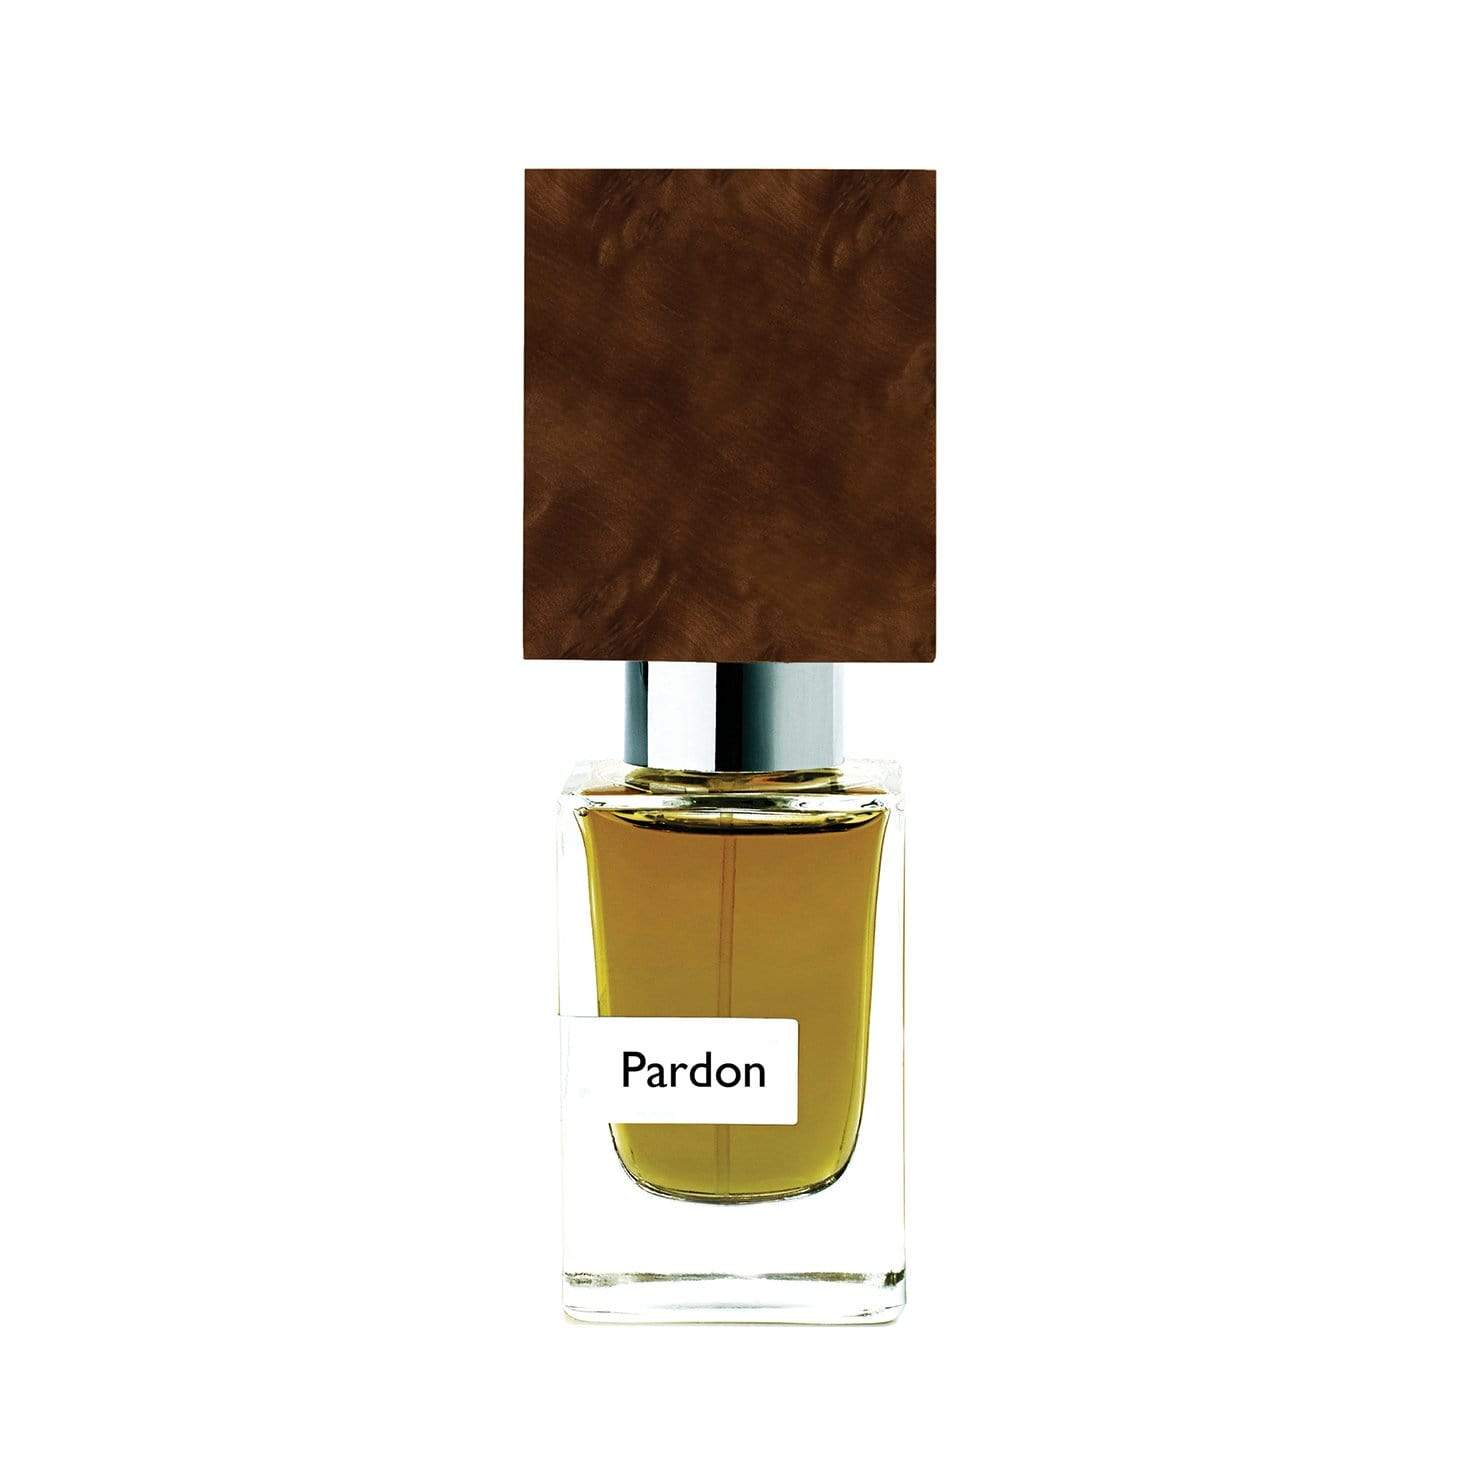 BEON.COM.AU Elegant and charming, Nasomatto's Pardon offers a soft, smooth fragrance experience for the skin. Pardon is inspired by the sophisticated and suave gentlemen of the late 18th and early 19th century. It opens with a faintly sweet floral whisper which then moves to hints of dark unsweetened cho... Nasomatto at BEON.COM.AU